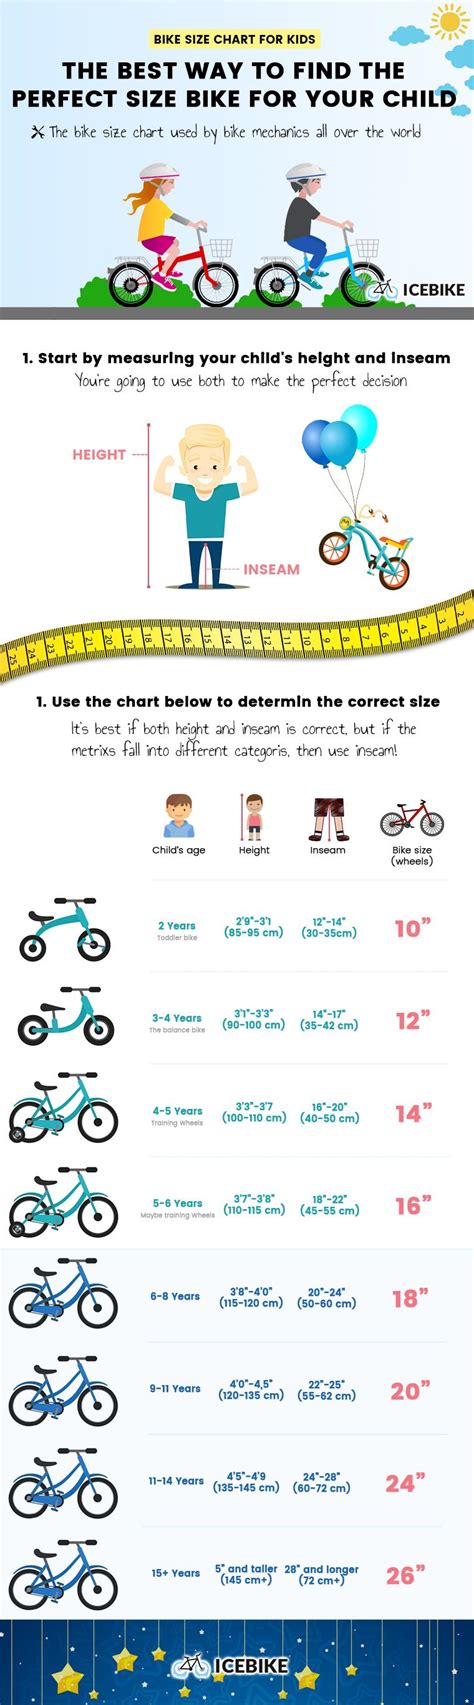 August 23, 2020 ridetvc leave a comment. Kids Bike Size Chart: The Definitive Guide to Kids Bike ...